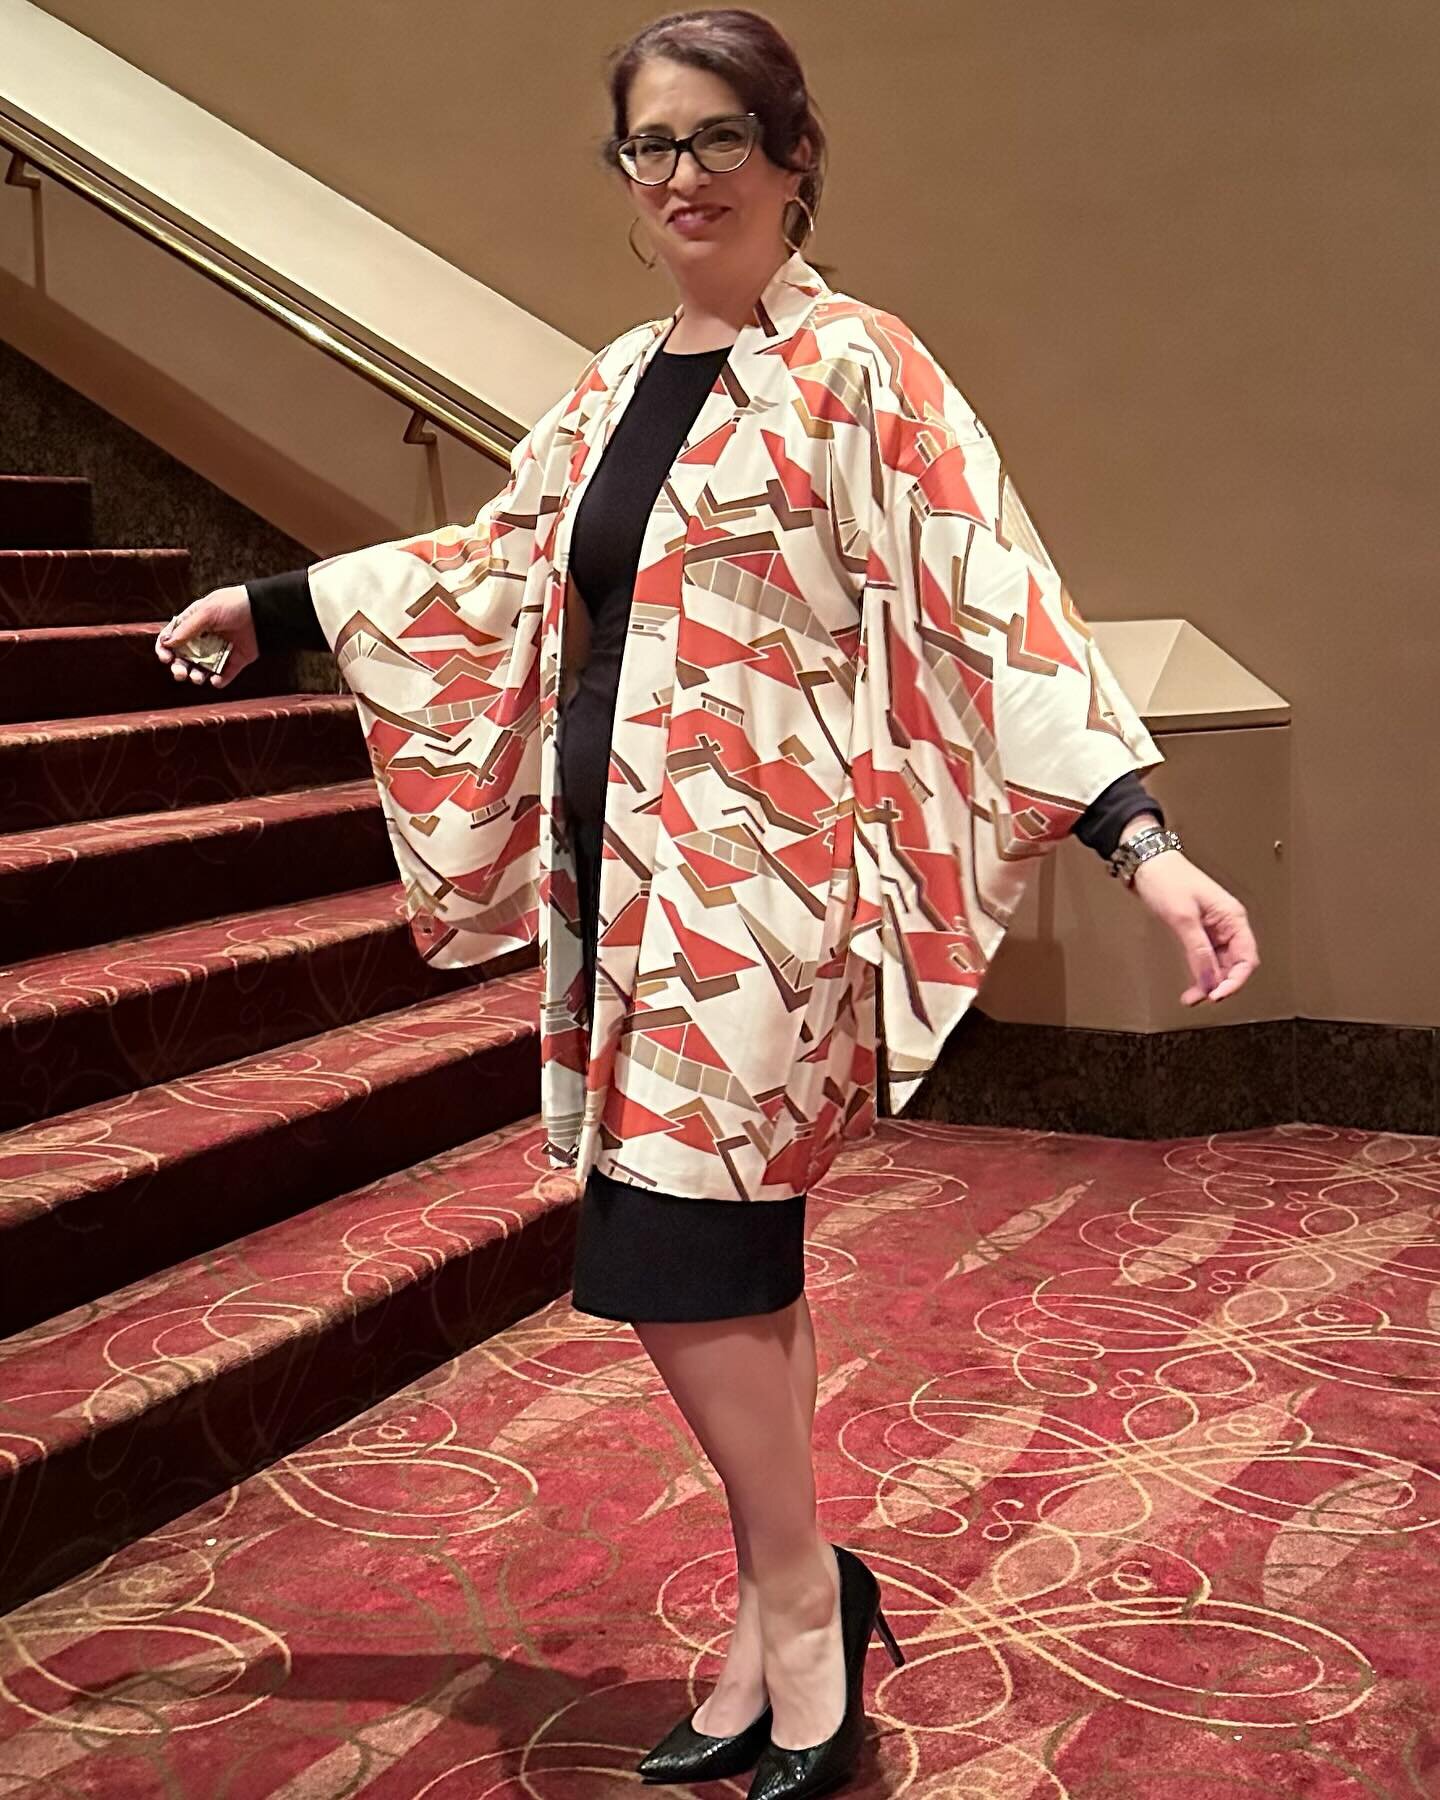 I finally got to wear the vintage kimono that I bought from @leonieanddavid to see @hgopera perform Madame Butterfly. I love it when my outfit is on theme!